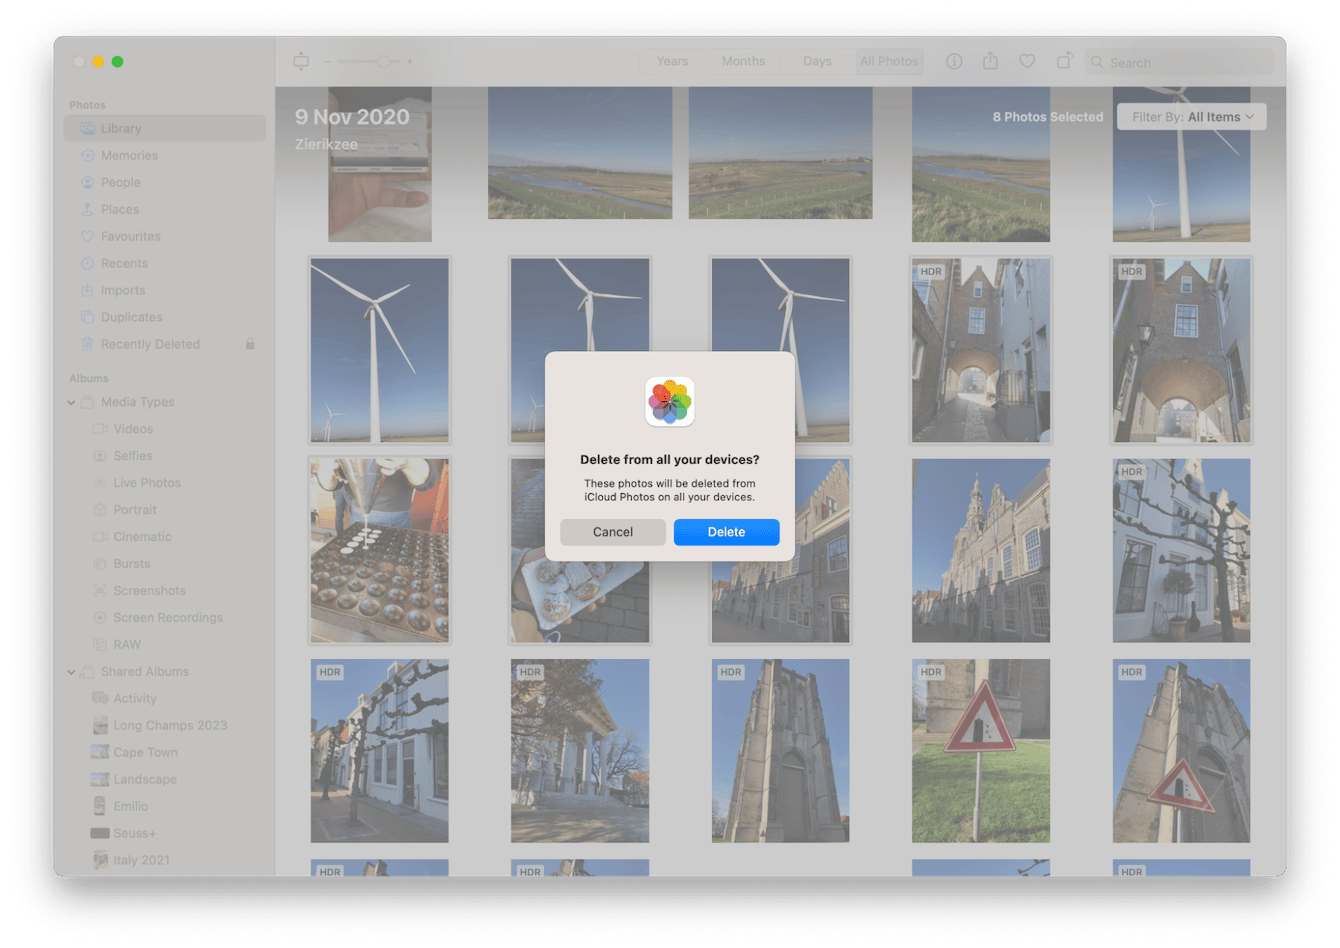 How to delete old photos and videos on iCloud storage